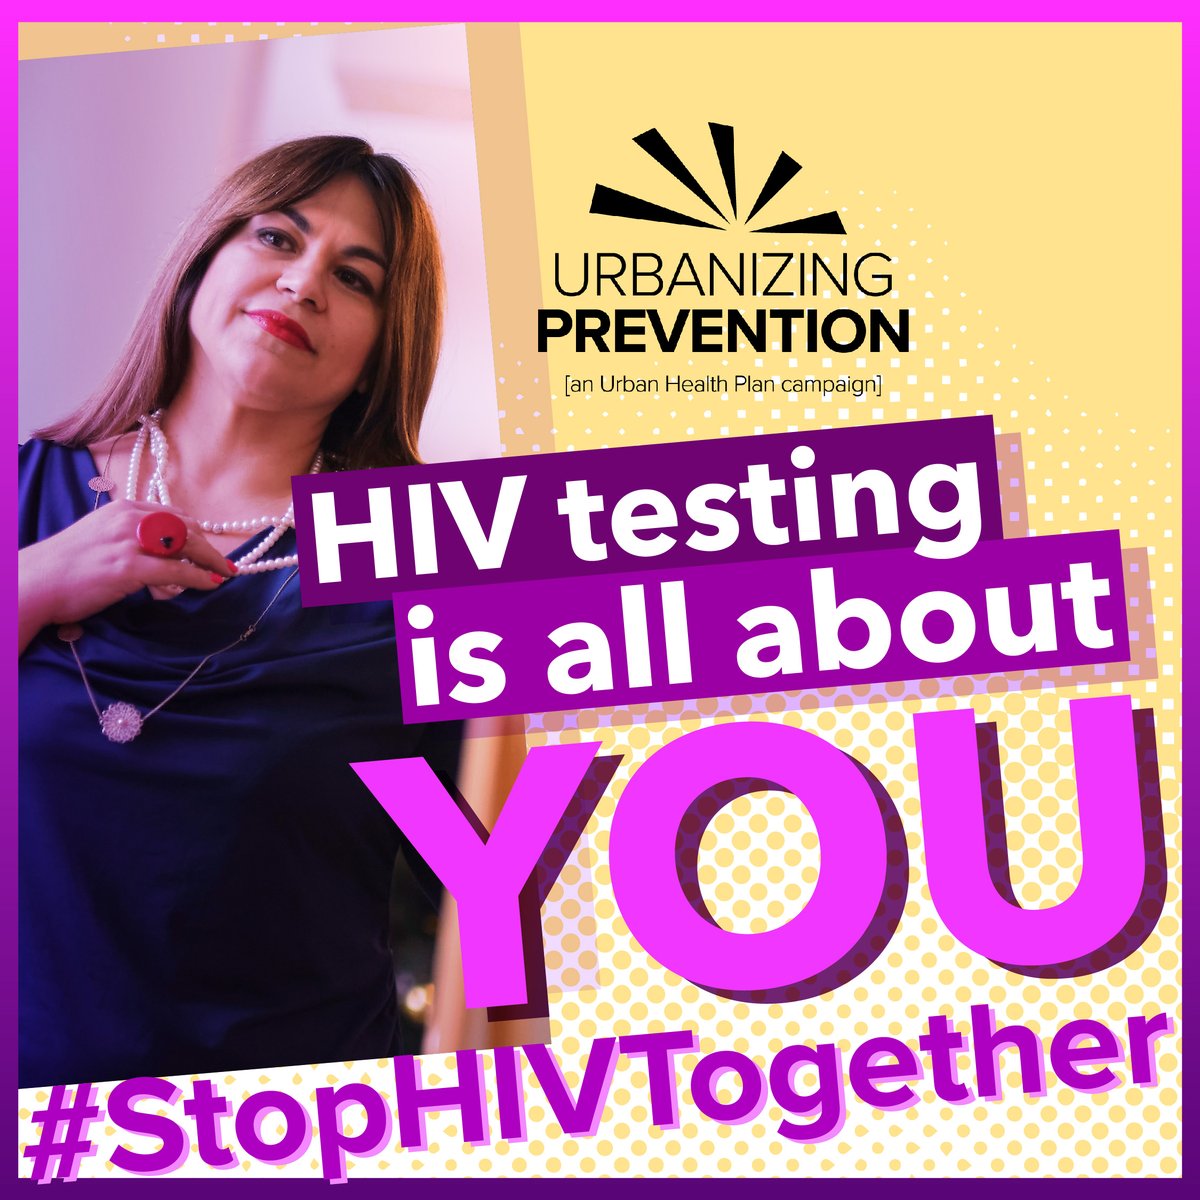 @PreventionUHP: Among women newly diagnosed with HIV, about 1 in 5 were dia...